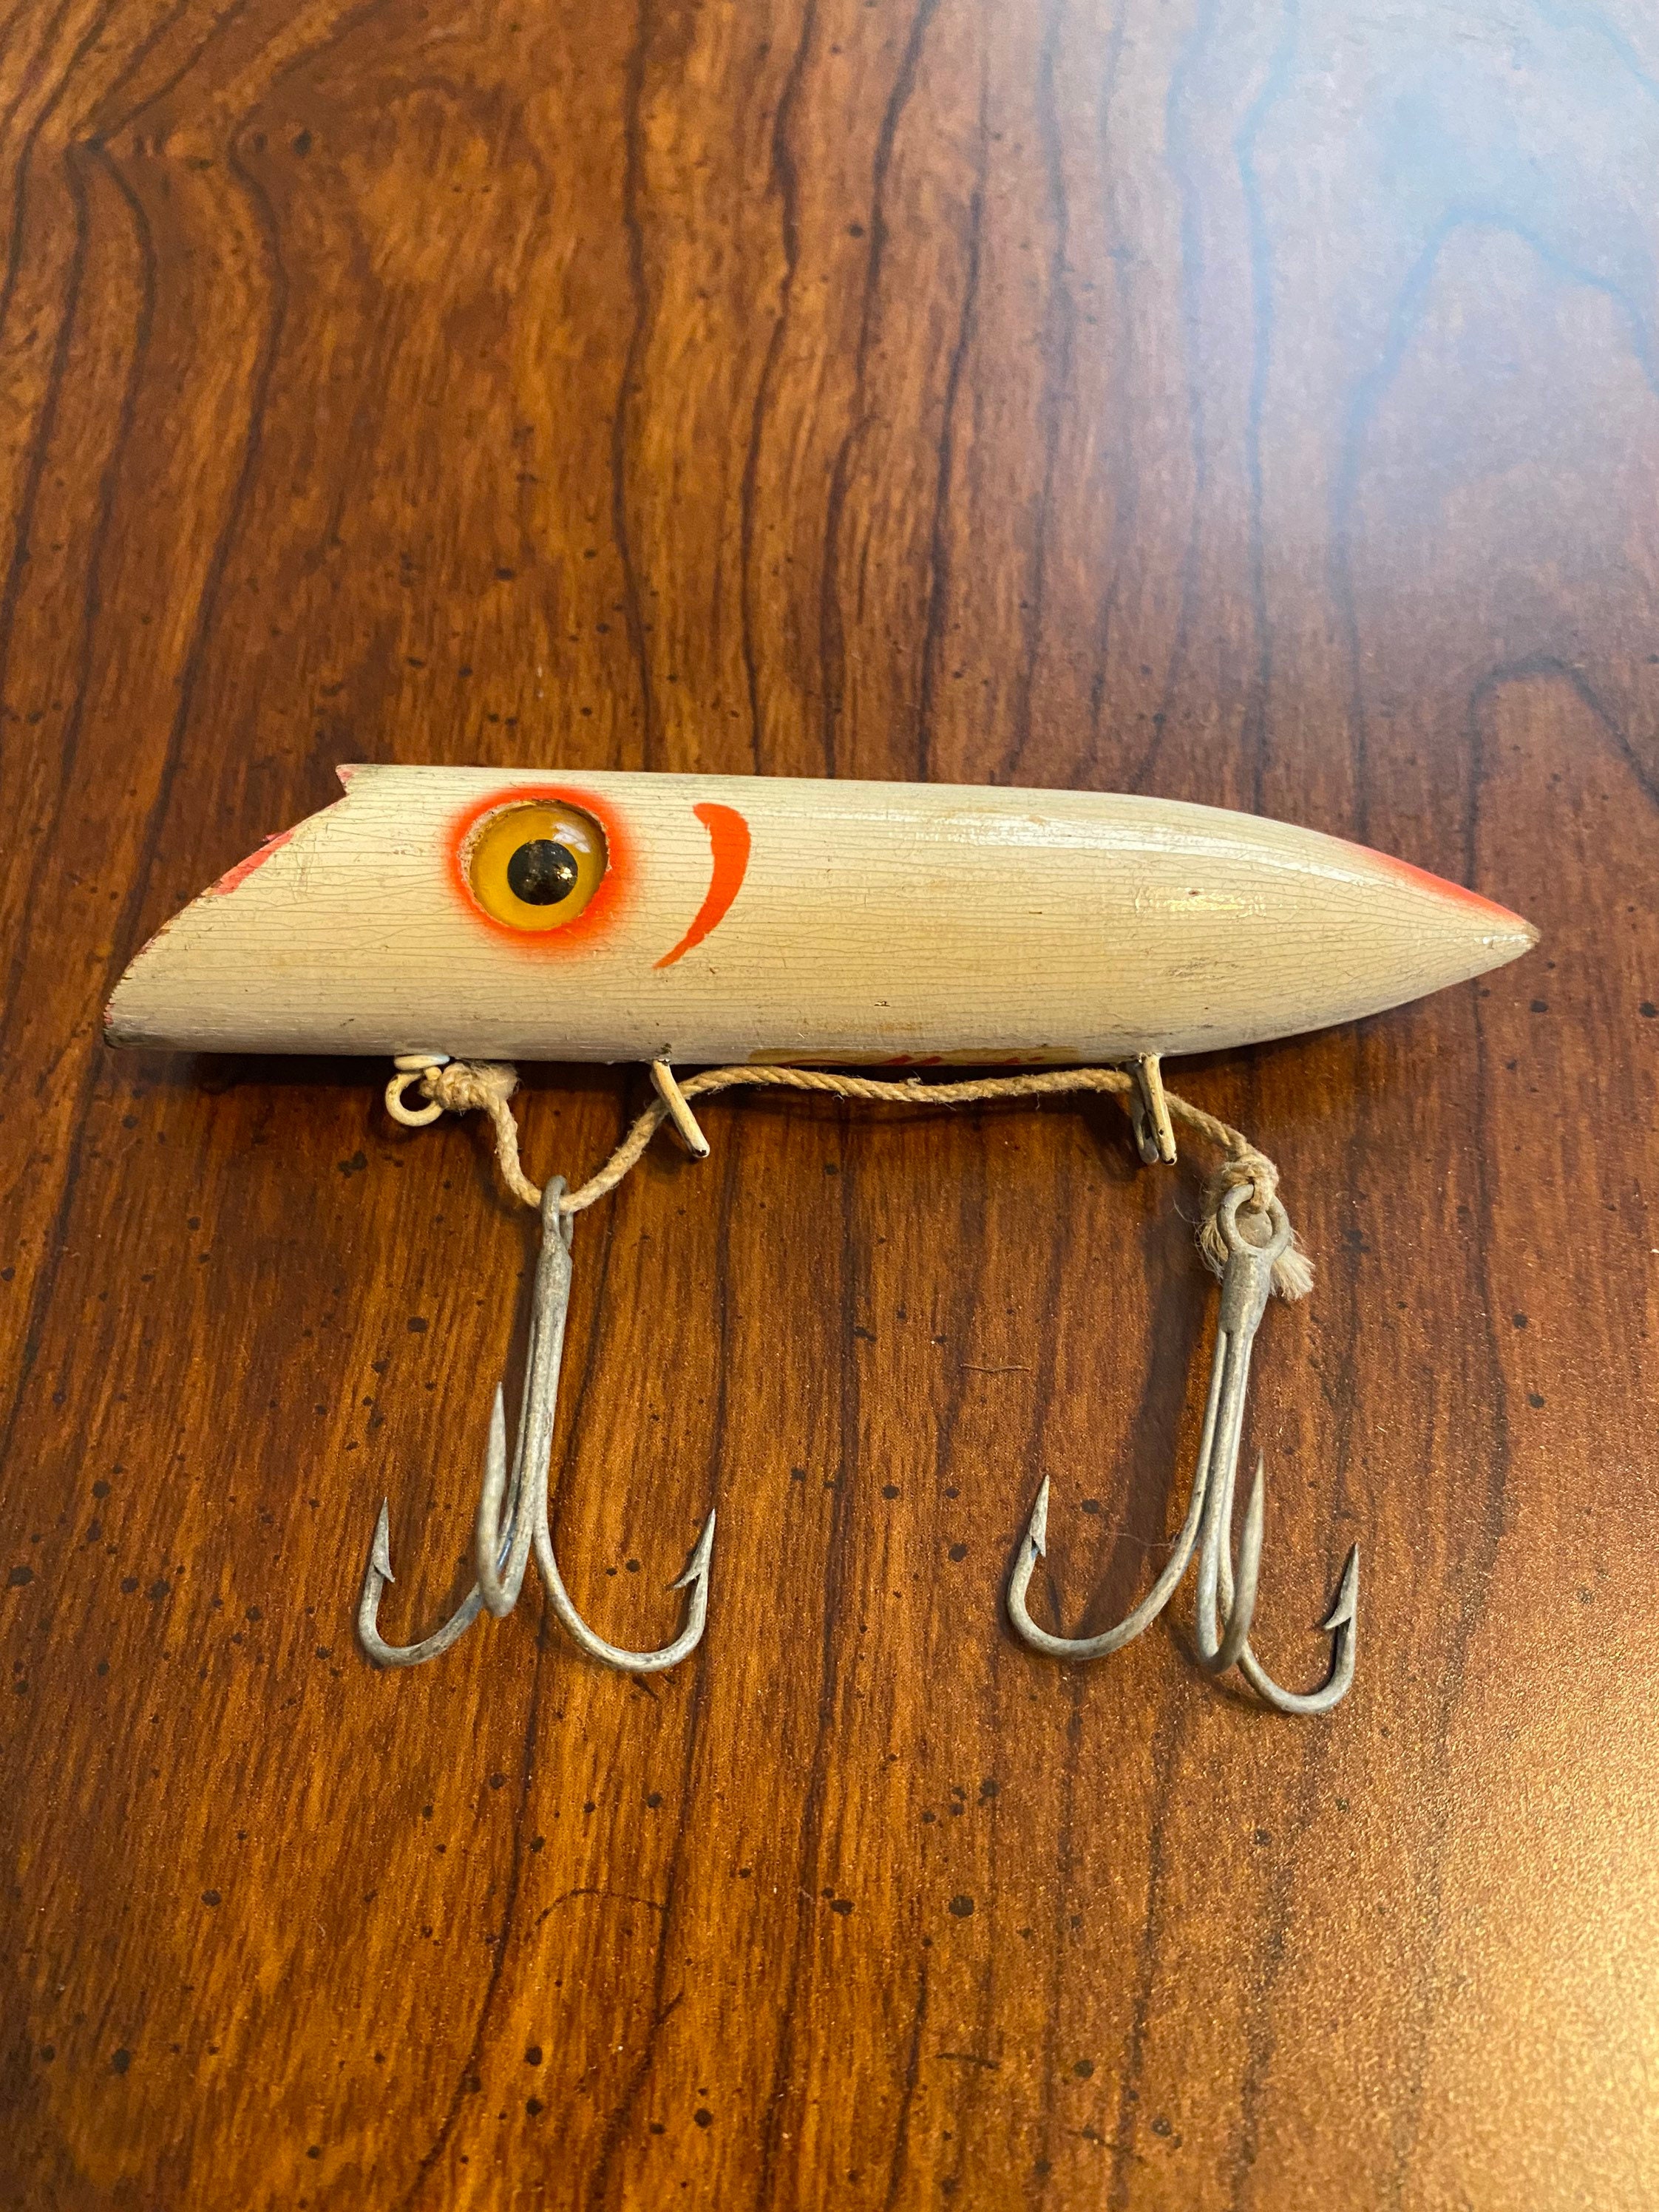 Vintage Wooden Martin Fishing Lure No. 2110382 